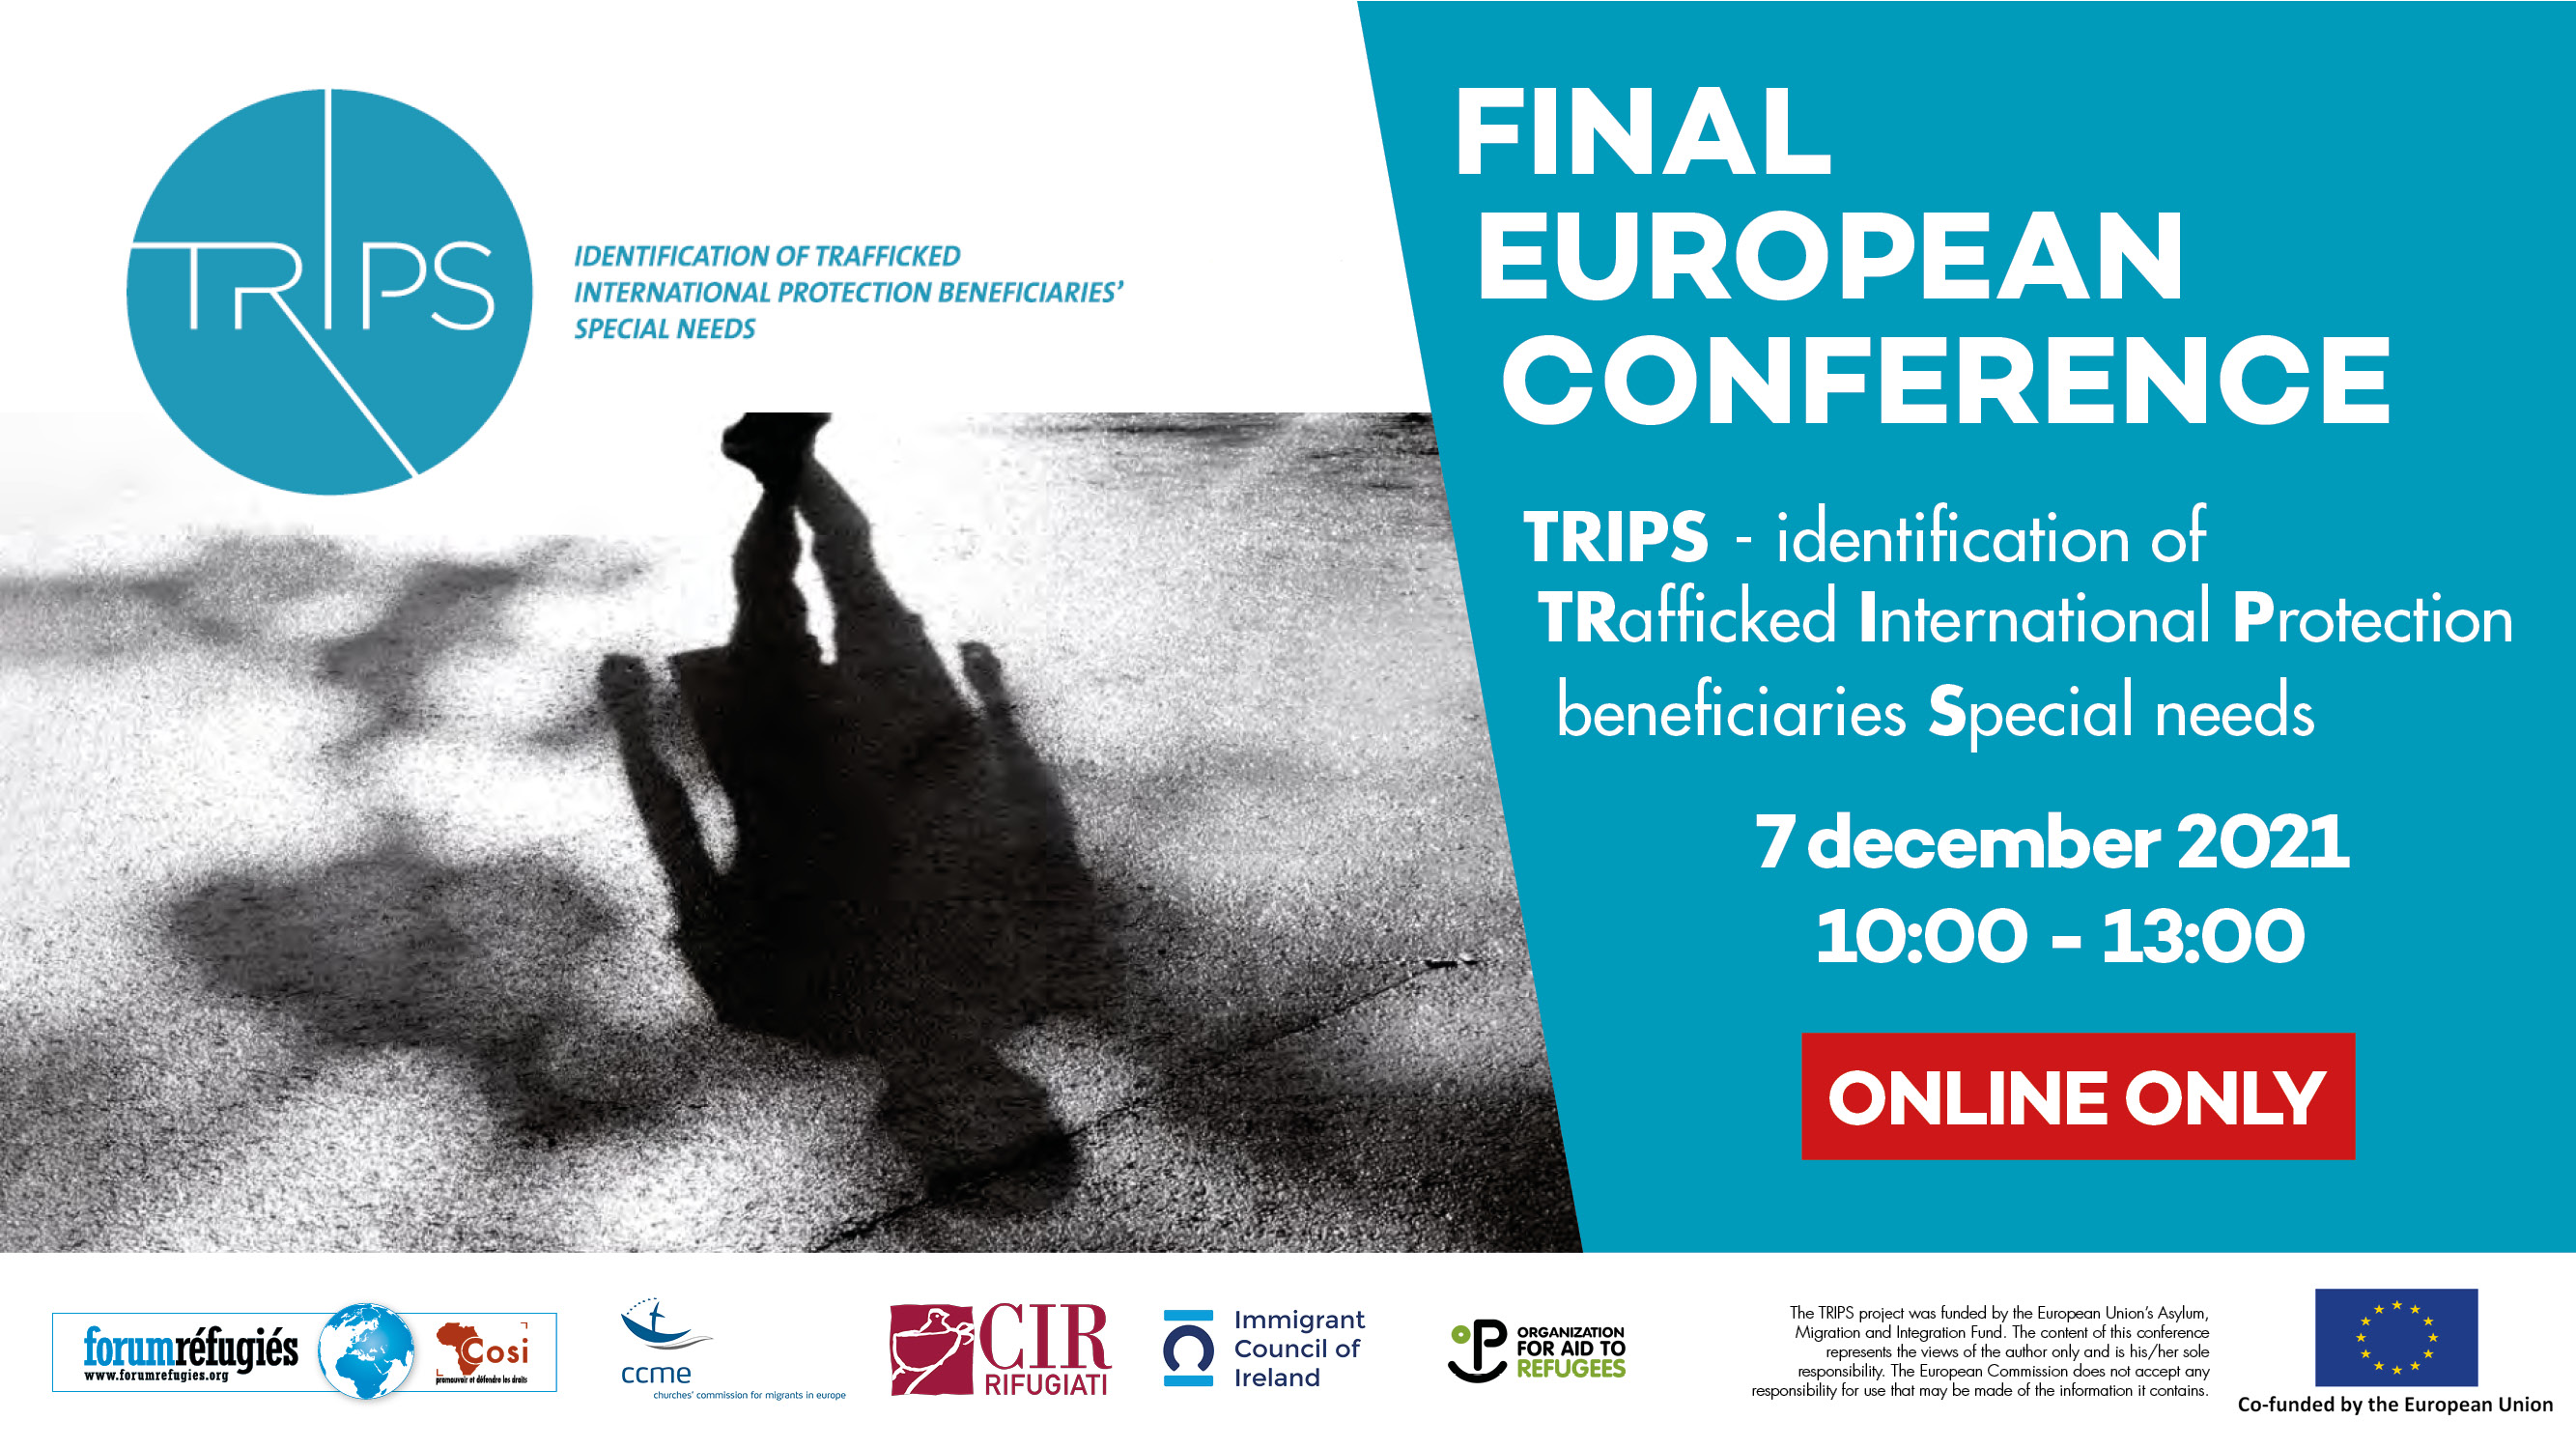 Final European Conference of the TRIPS project